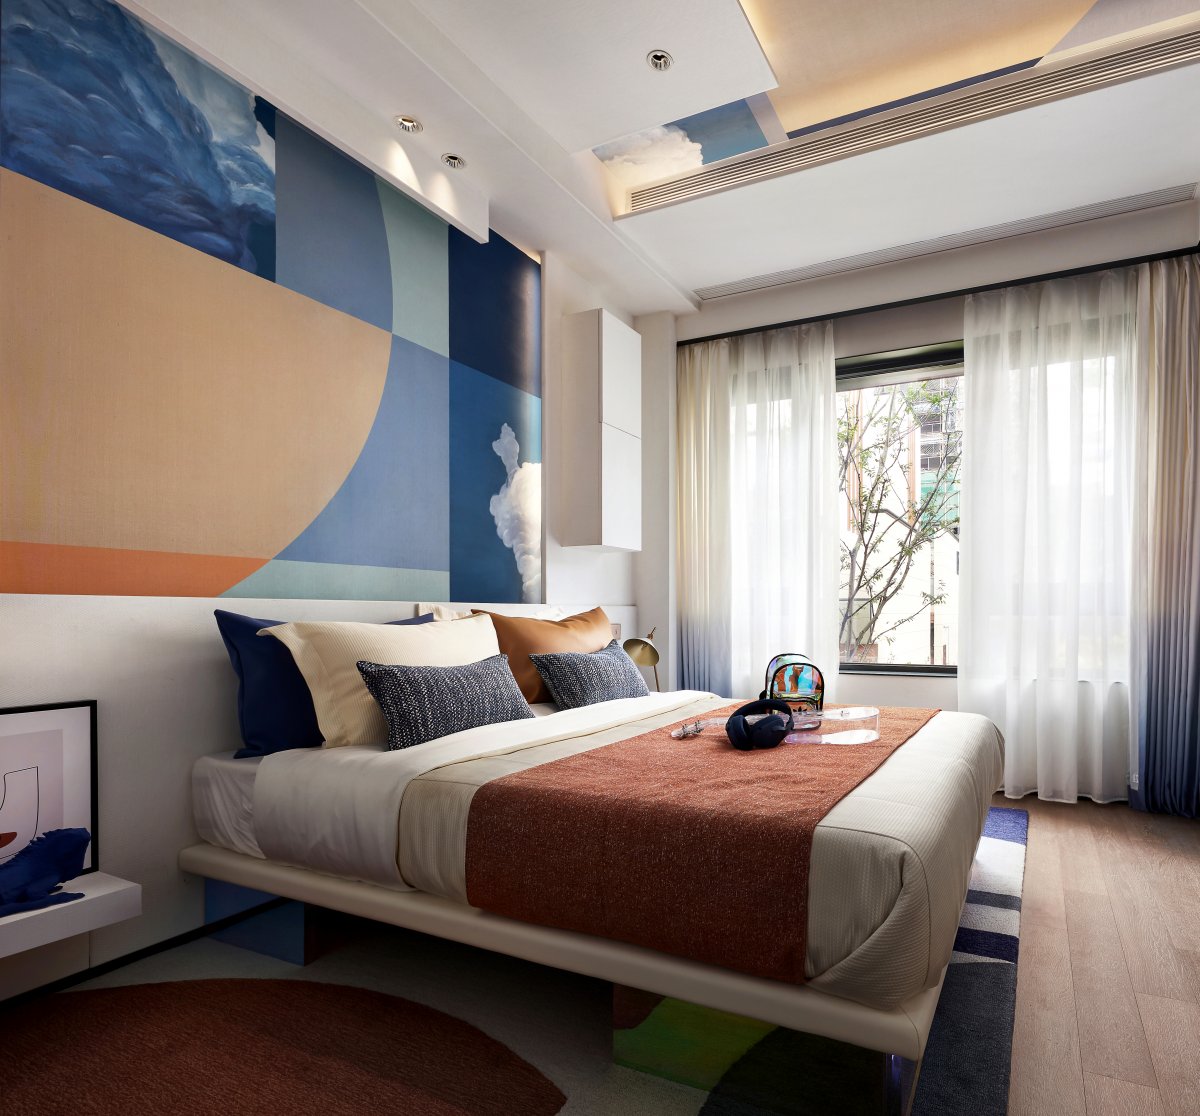 An electrifying moon story told by GBD studio in the luxury villa project - Bedroom